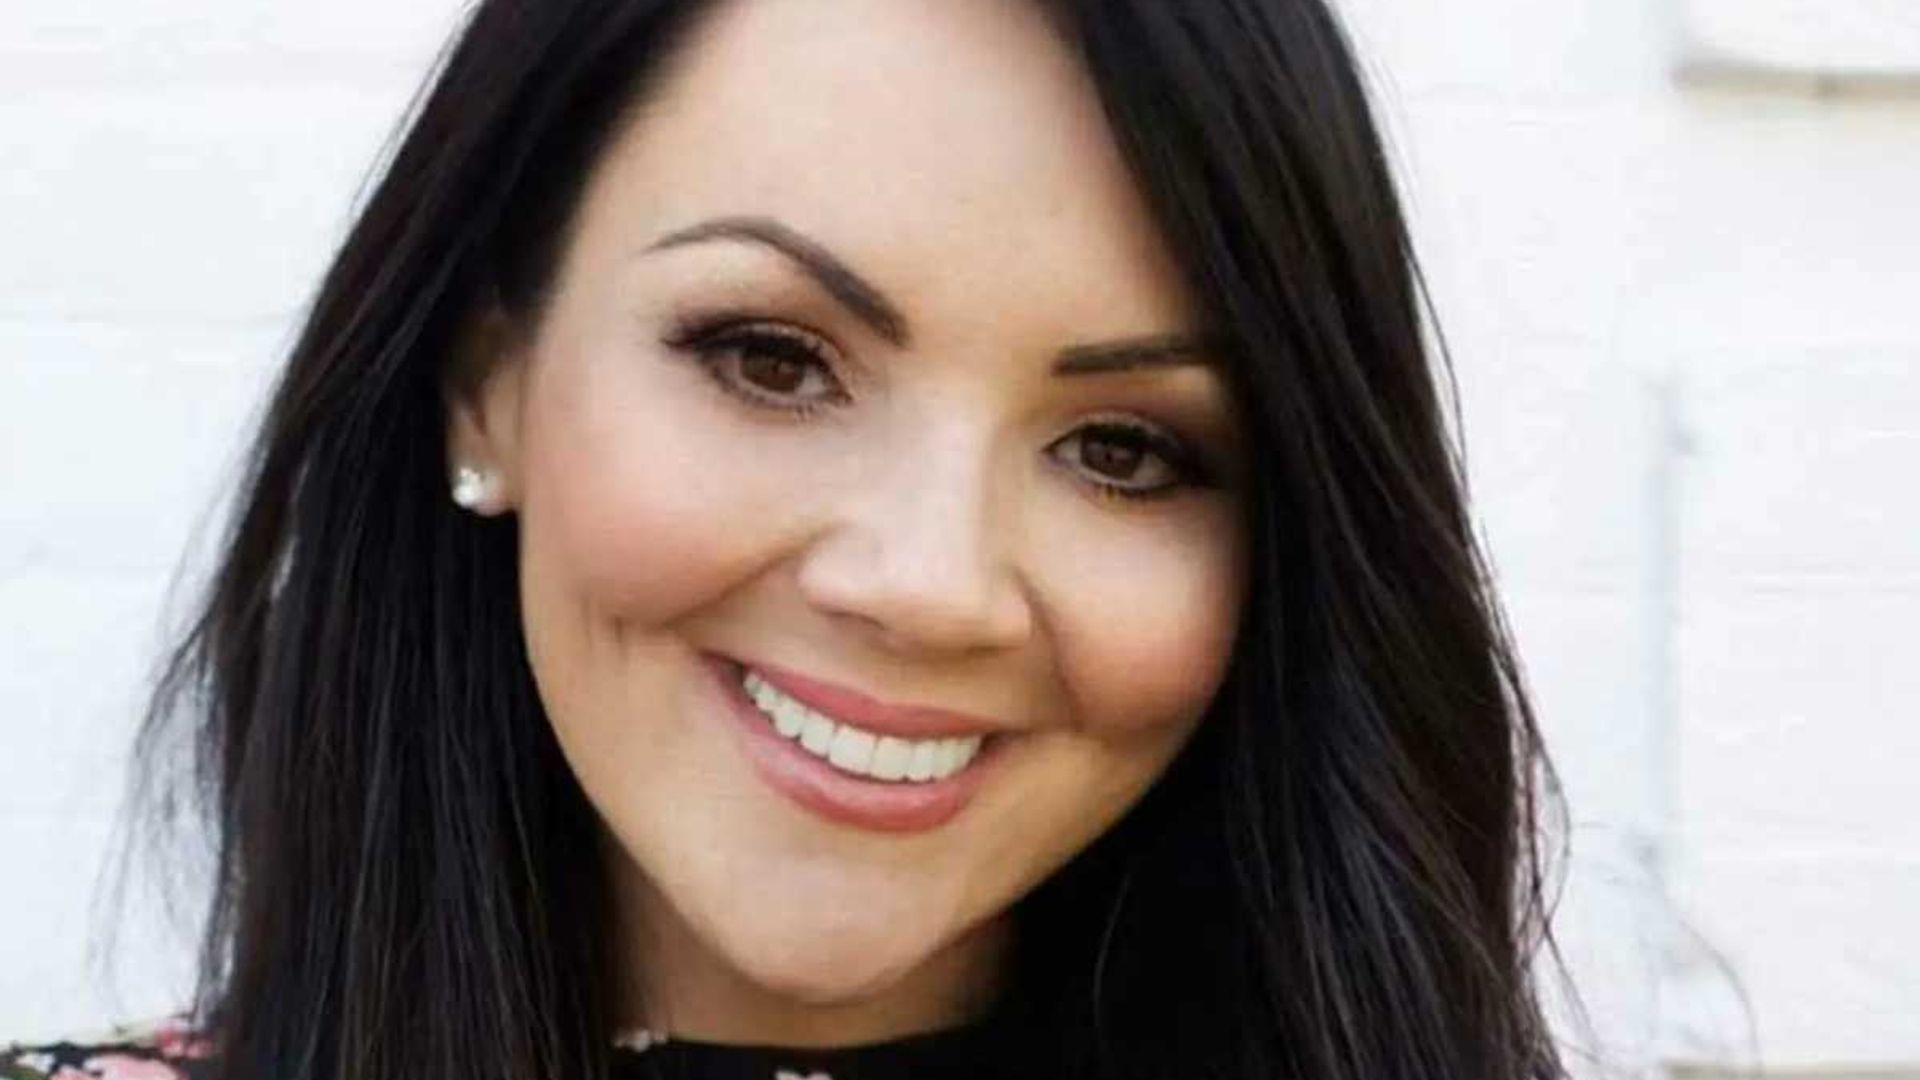 Martine McCutcheon sparks speculation with cryptic wedding dress photo